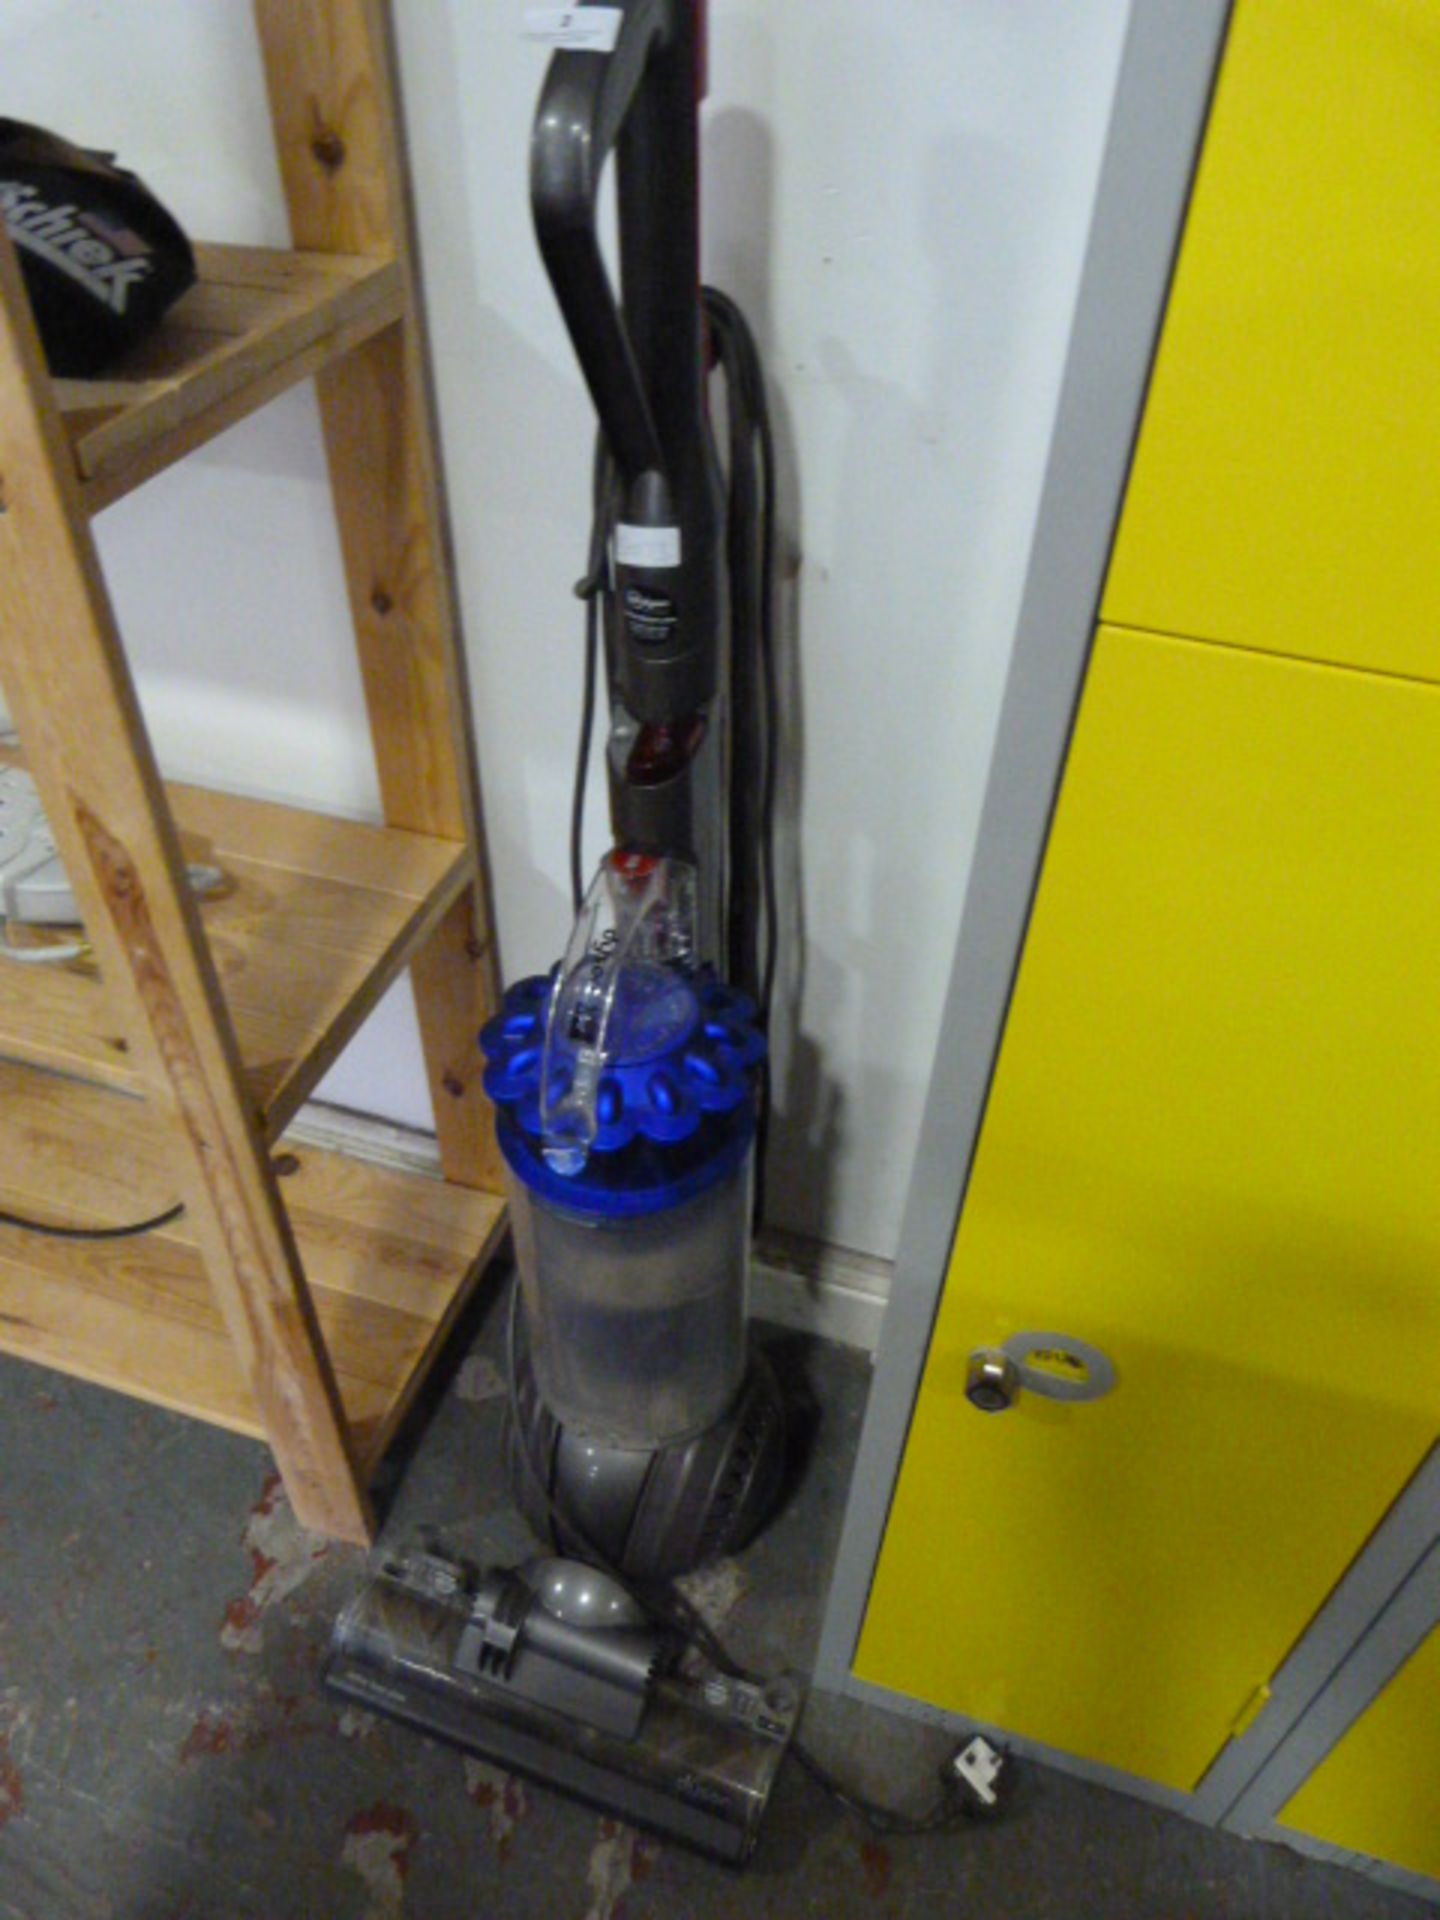 *Dyson DC41 Upright Vacuum Cleaner